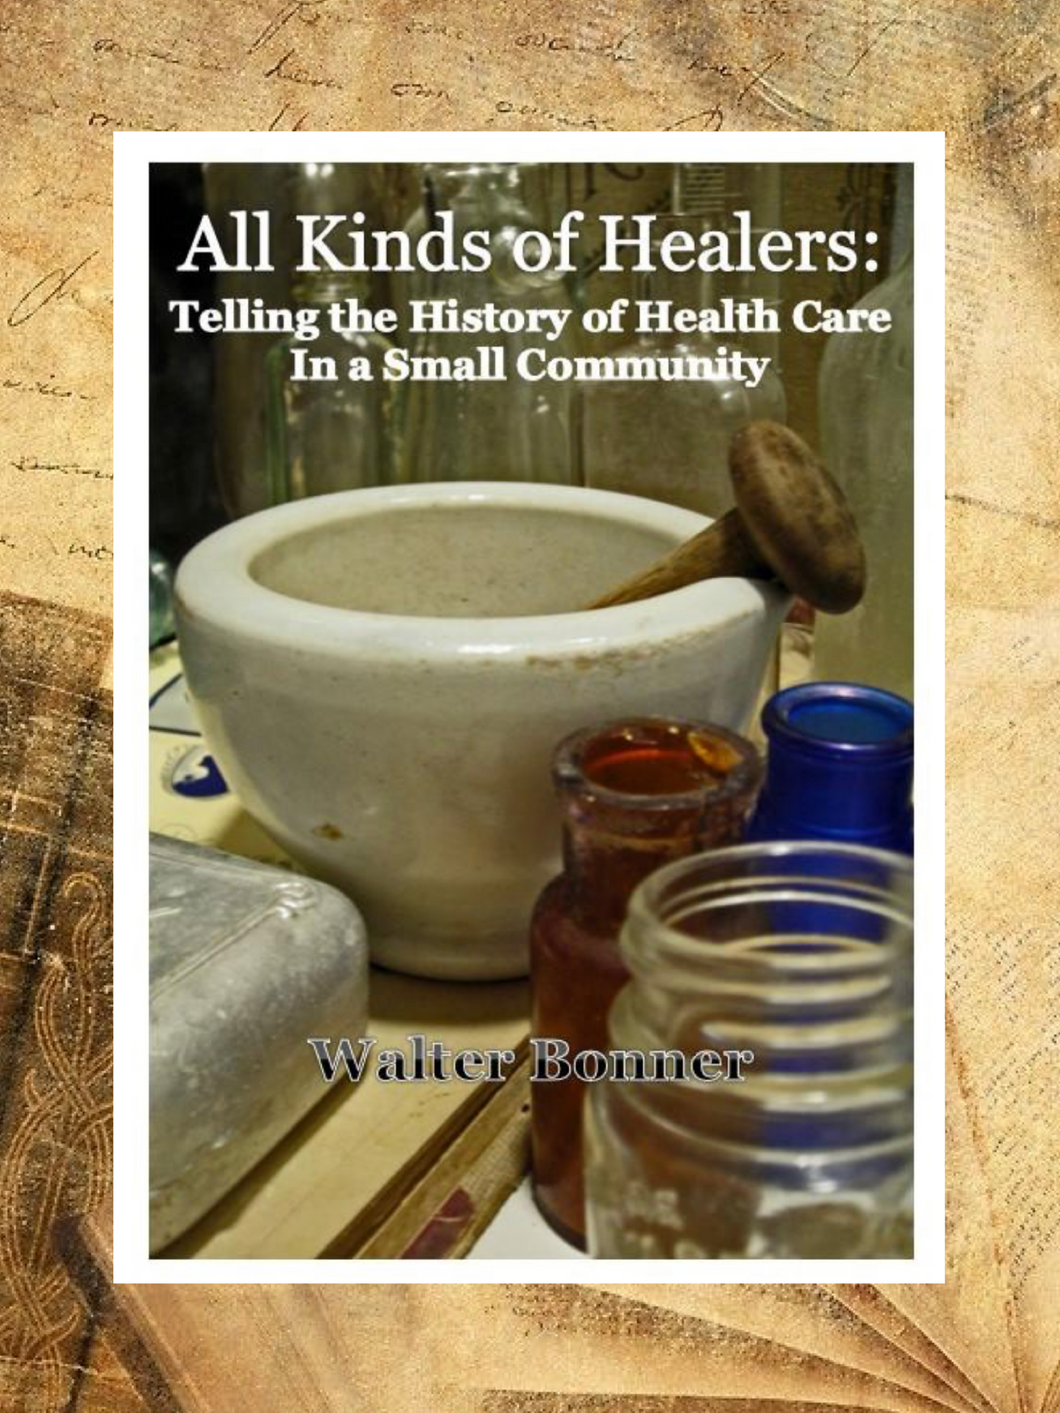 All Kinds of Healers: Telling the History of Health Care in a Small Community ~ Walter Bonner